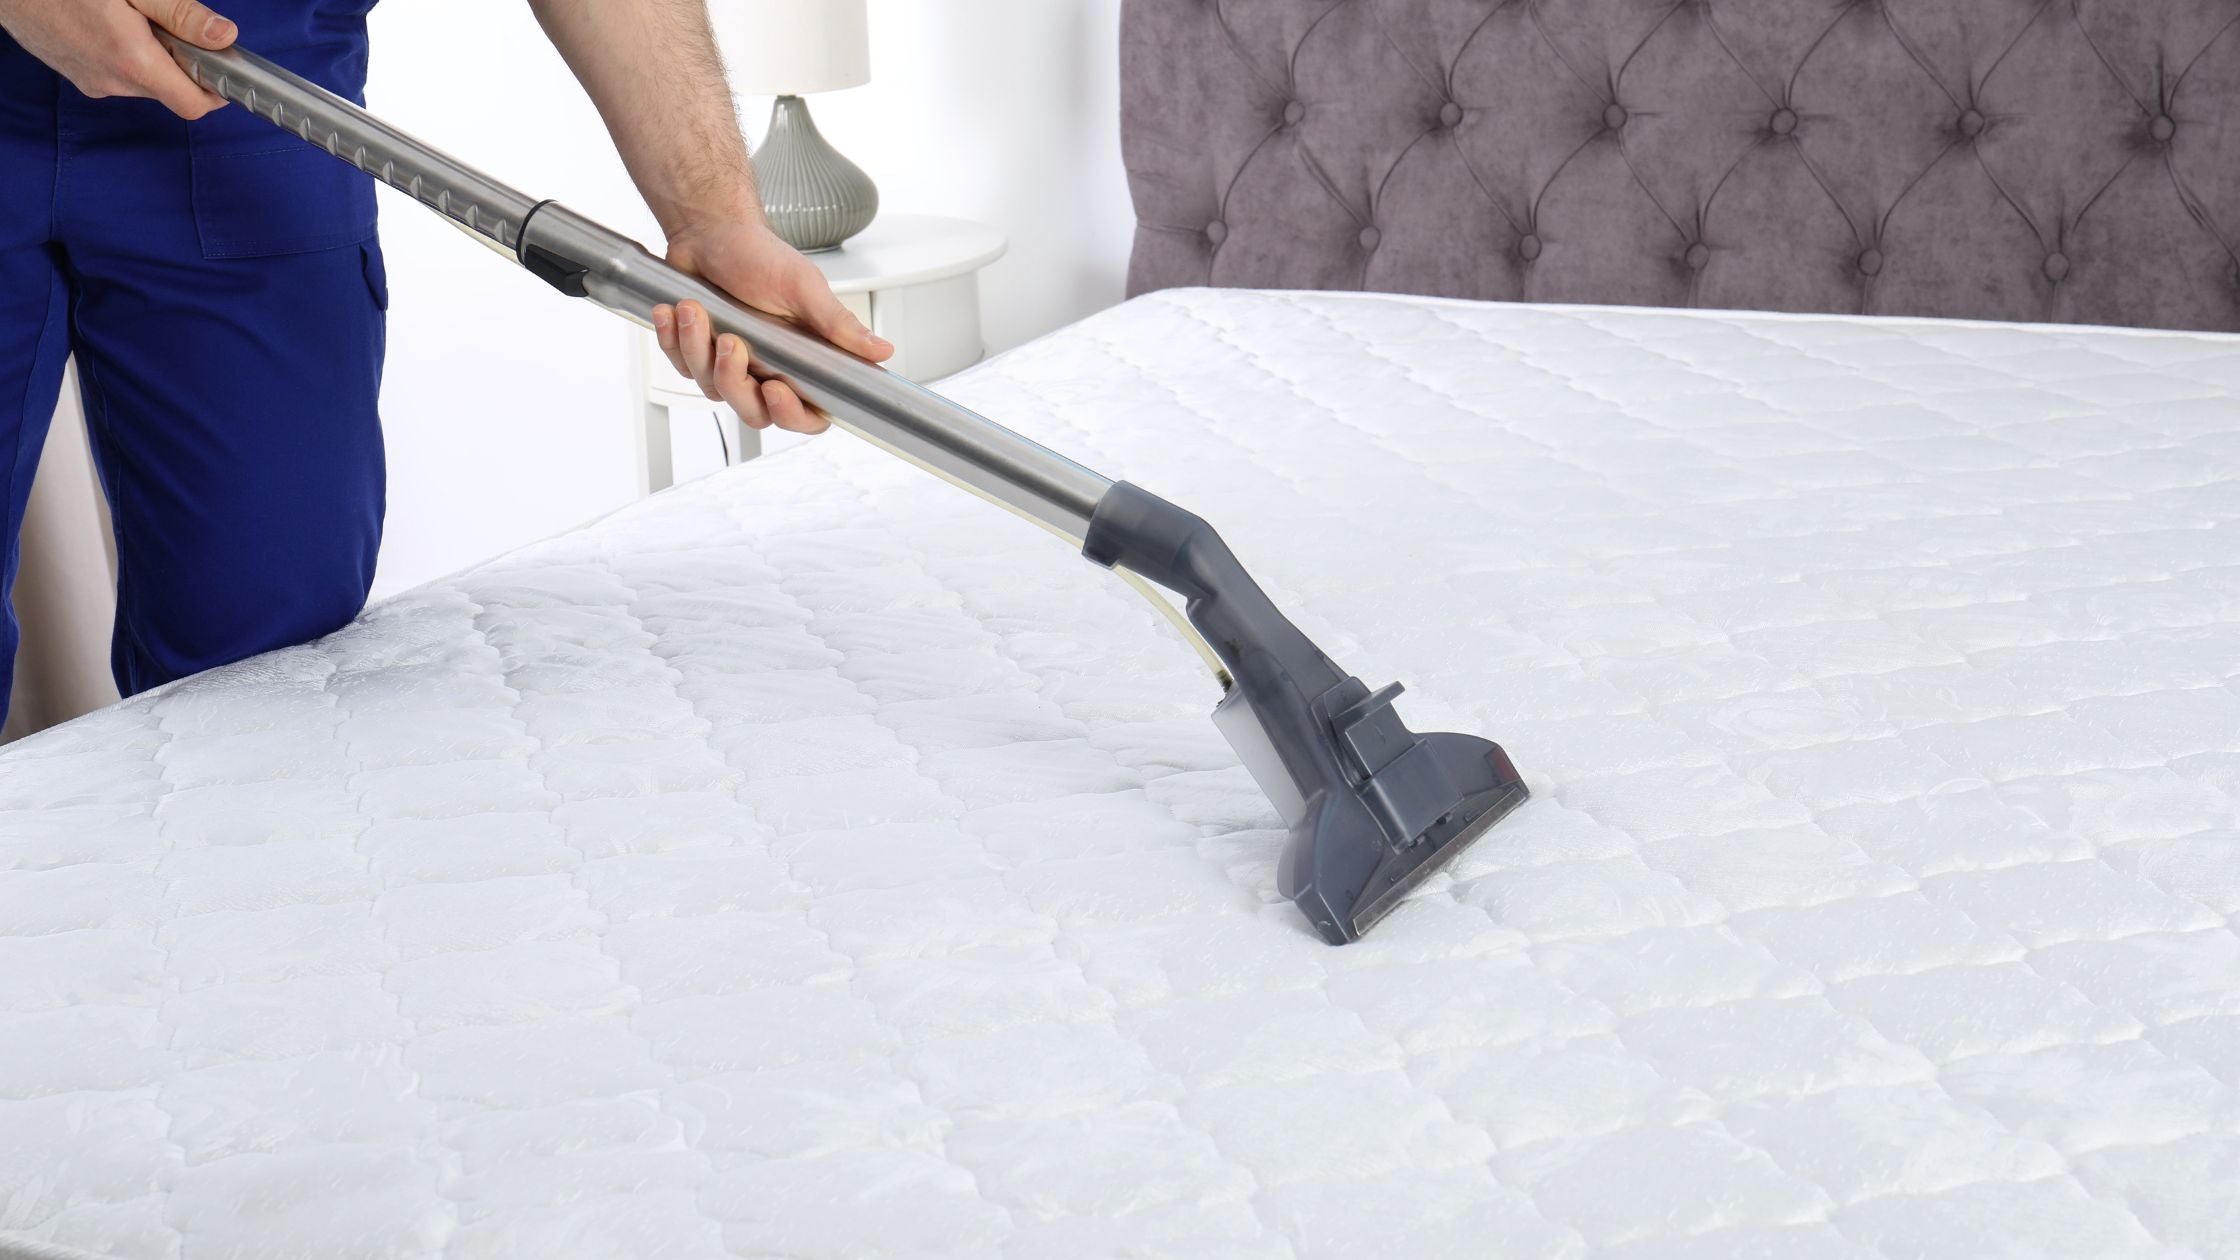 Benefits of Using a Mattress Protector